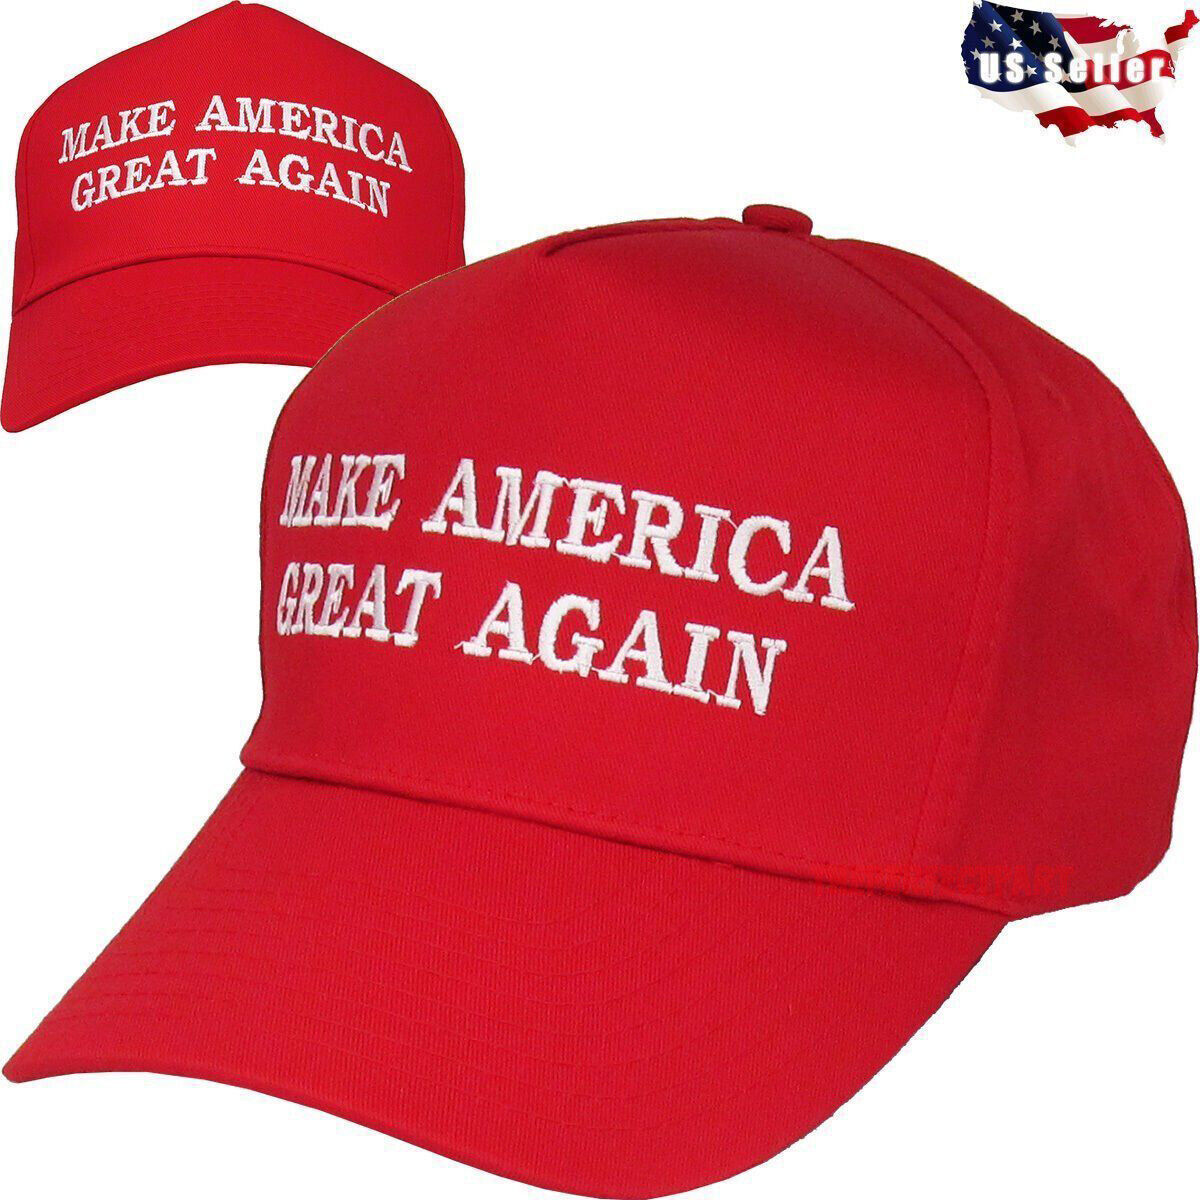 Red MAGA Make America Great Again President Donald Trump Hat Cap Embroidered USA